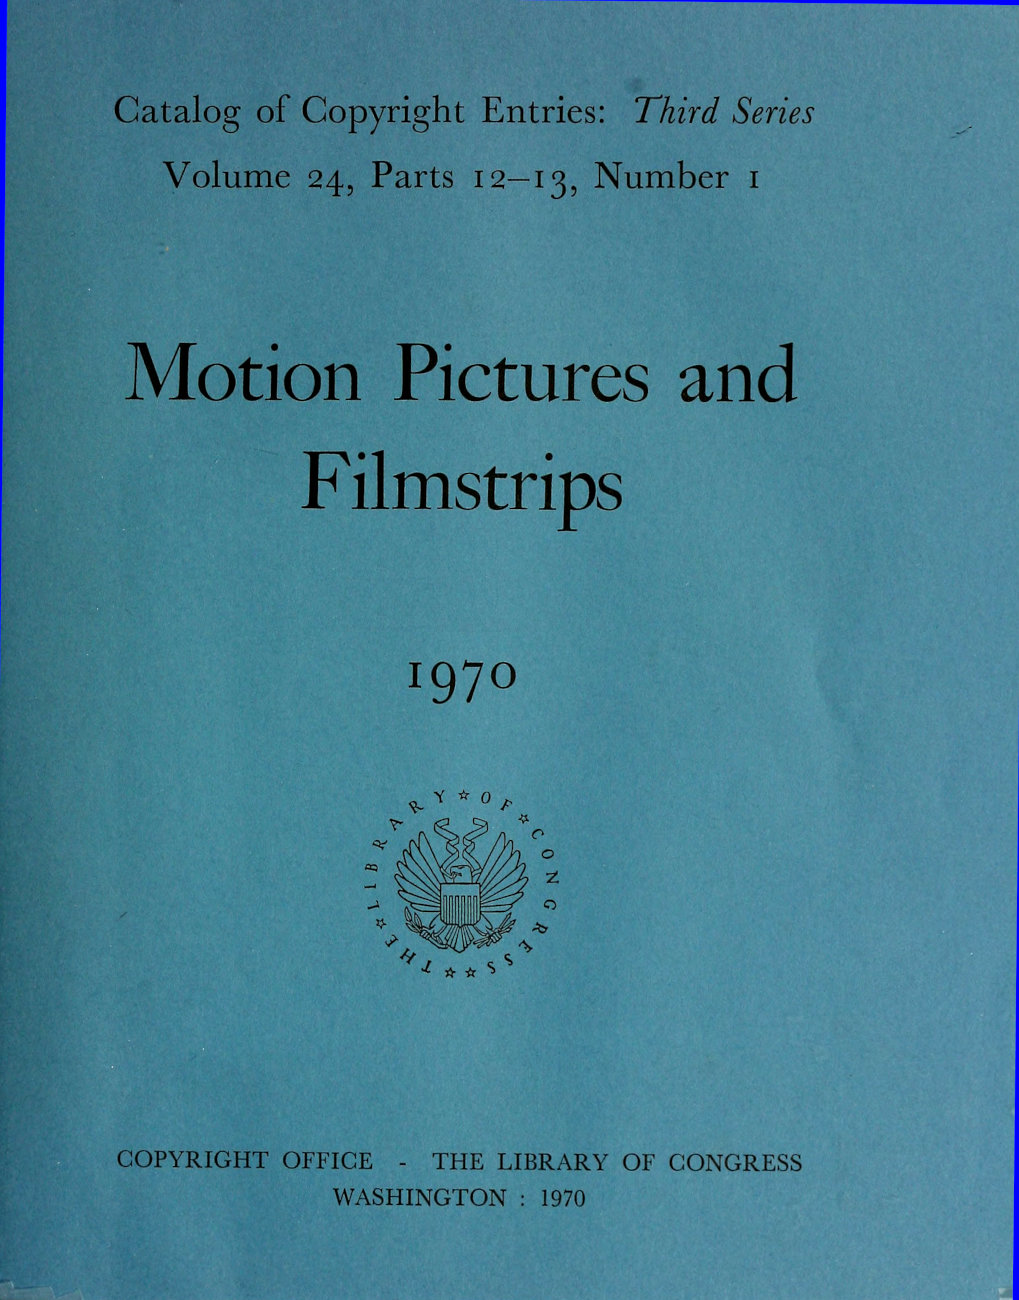 Motion pictures and filmstrips, January-June 1970